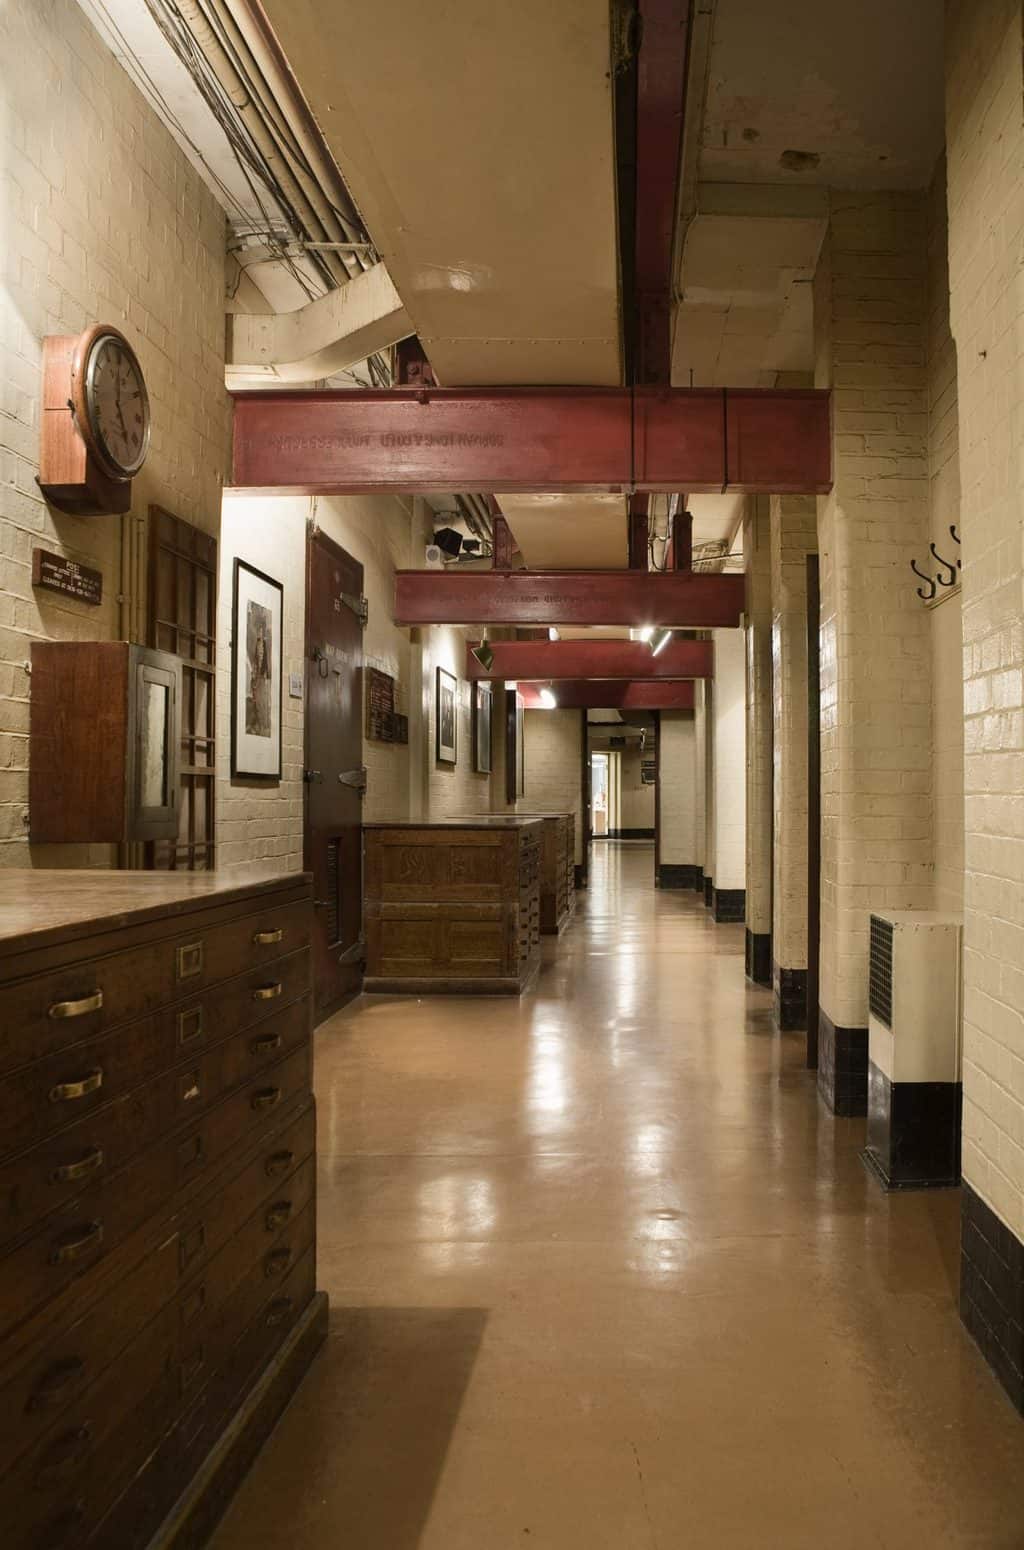 Churchill War Rooms Review In London